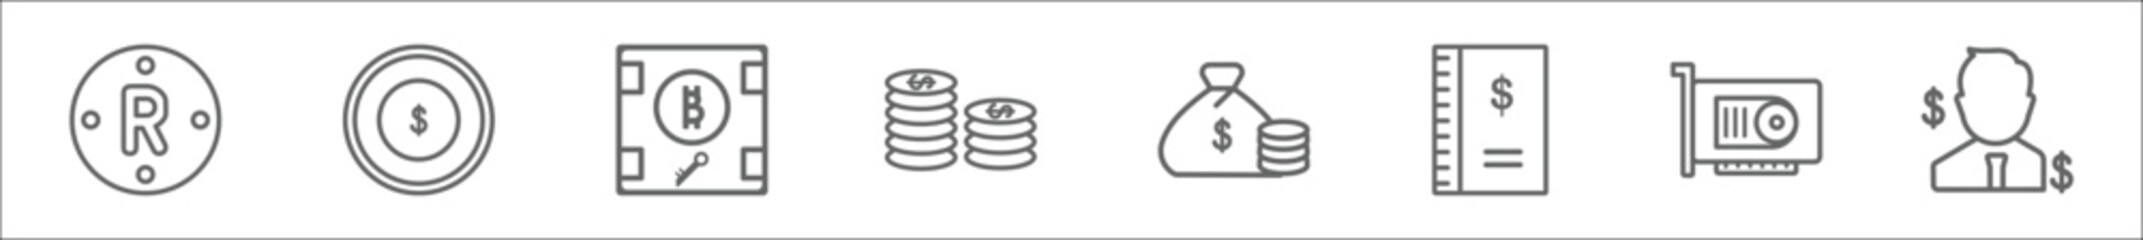 Poster - outline set of economyandfinance line icons. linear vector icons such as rupee, dollar, proof of stake, funds, as, ledger, vga card, investor